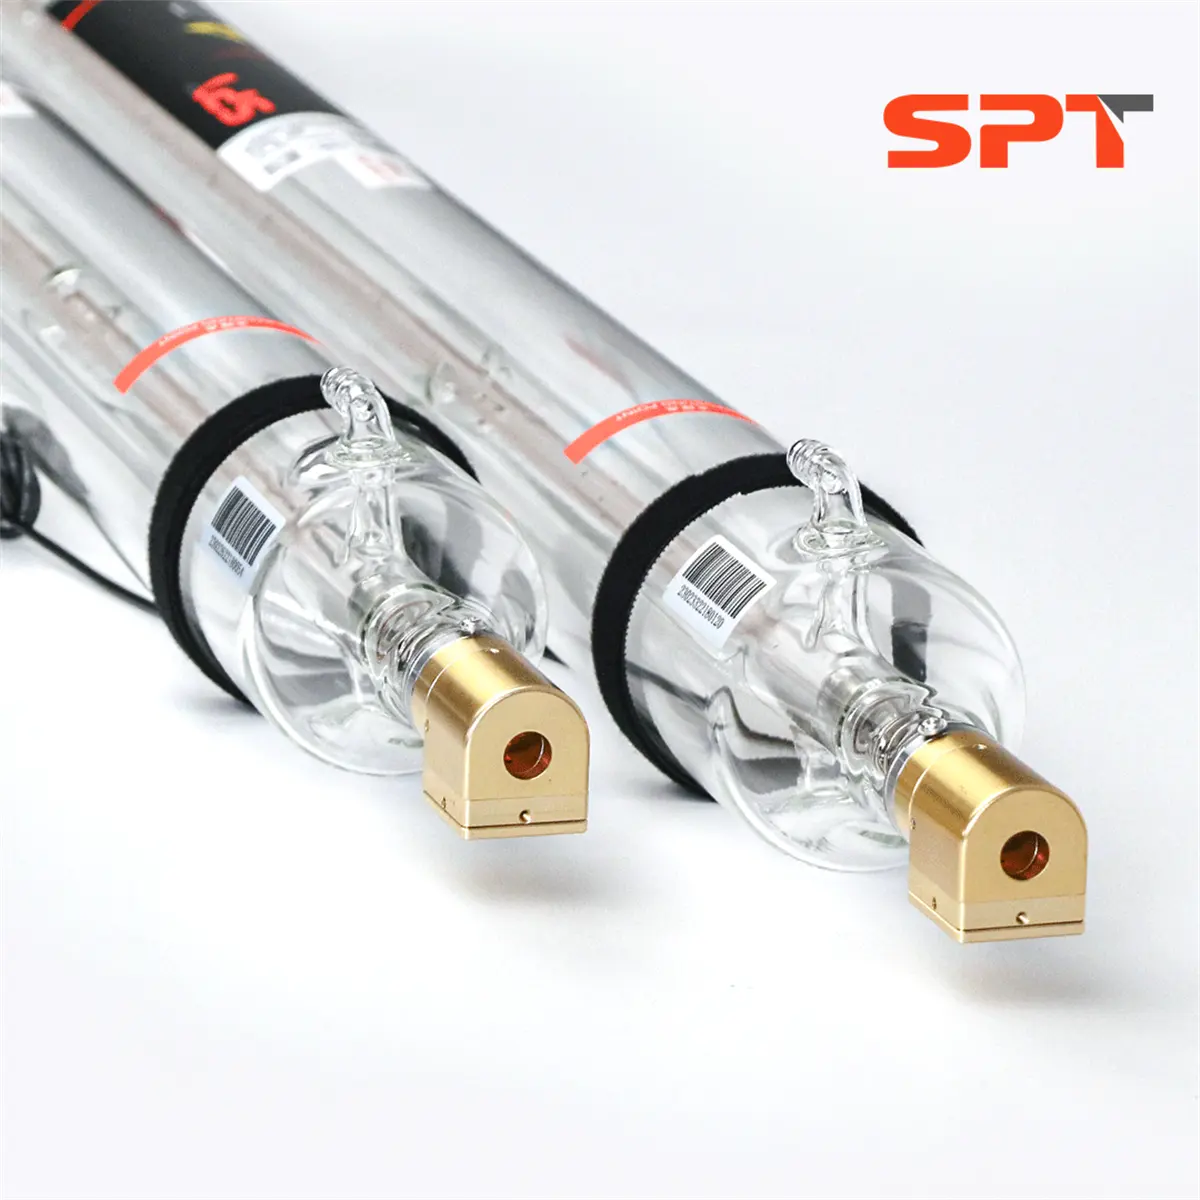 Factory sales SPT high power With positioning function 150w CO2 laser tube for laser Cutting plank/glass